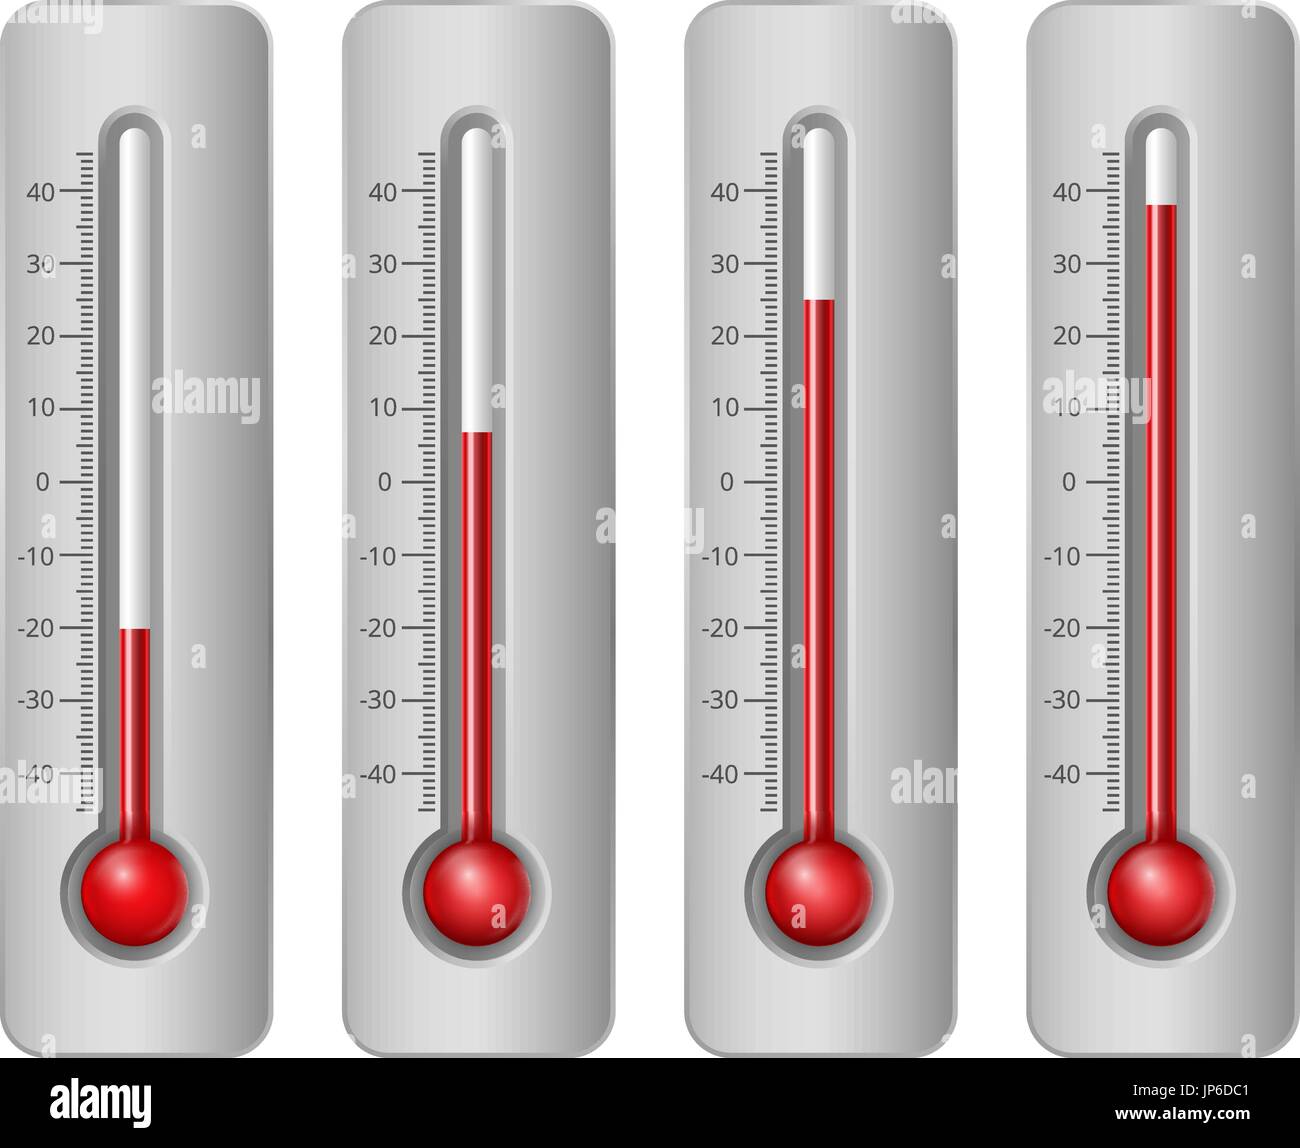 https://c8.alamy.com/comp/JP6DC1/thermometers-different-levels-JP6DC1.jpg